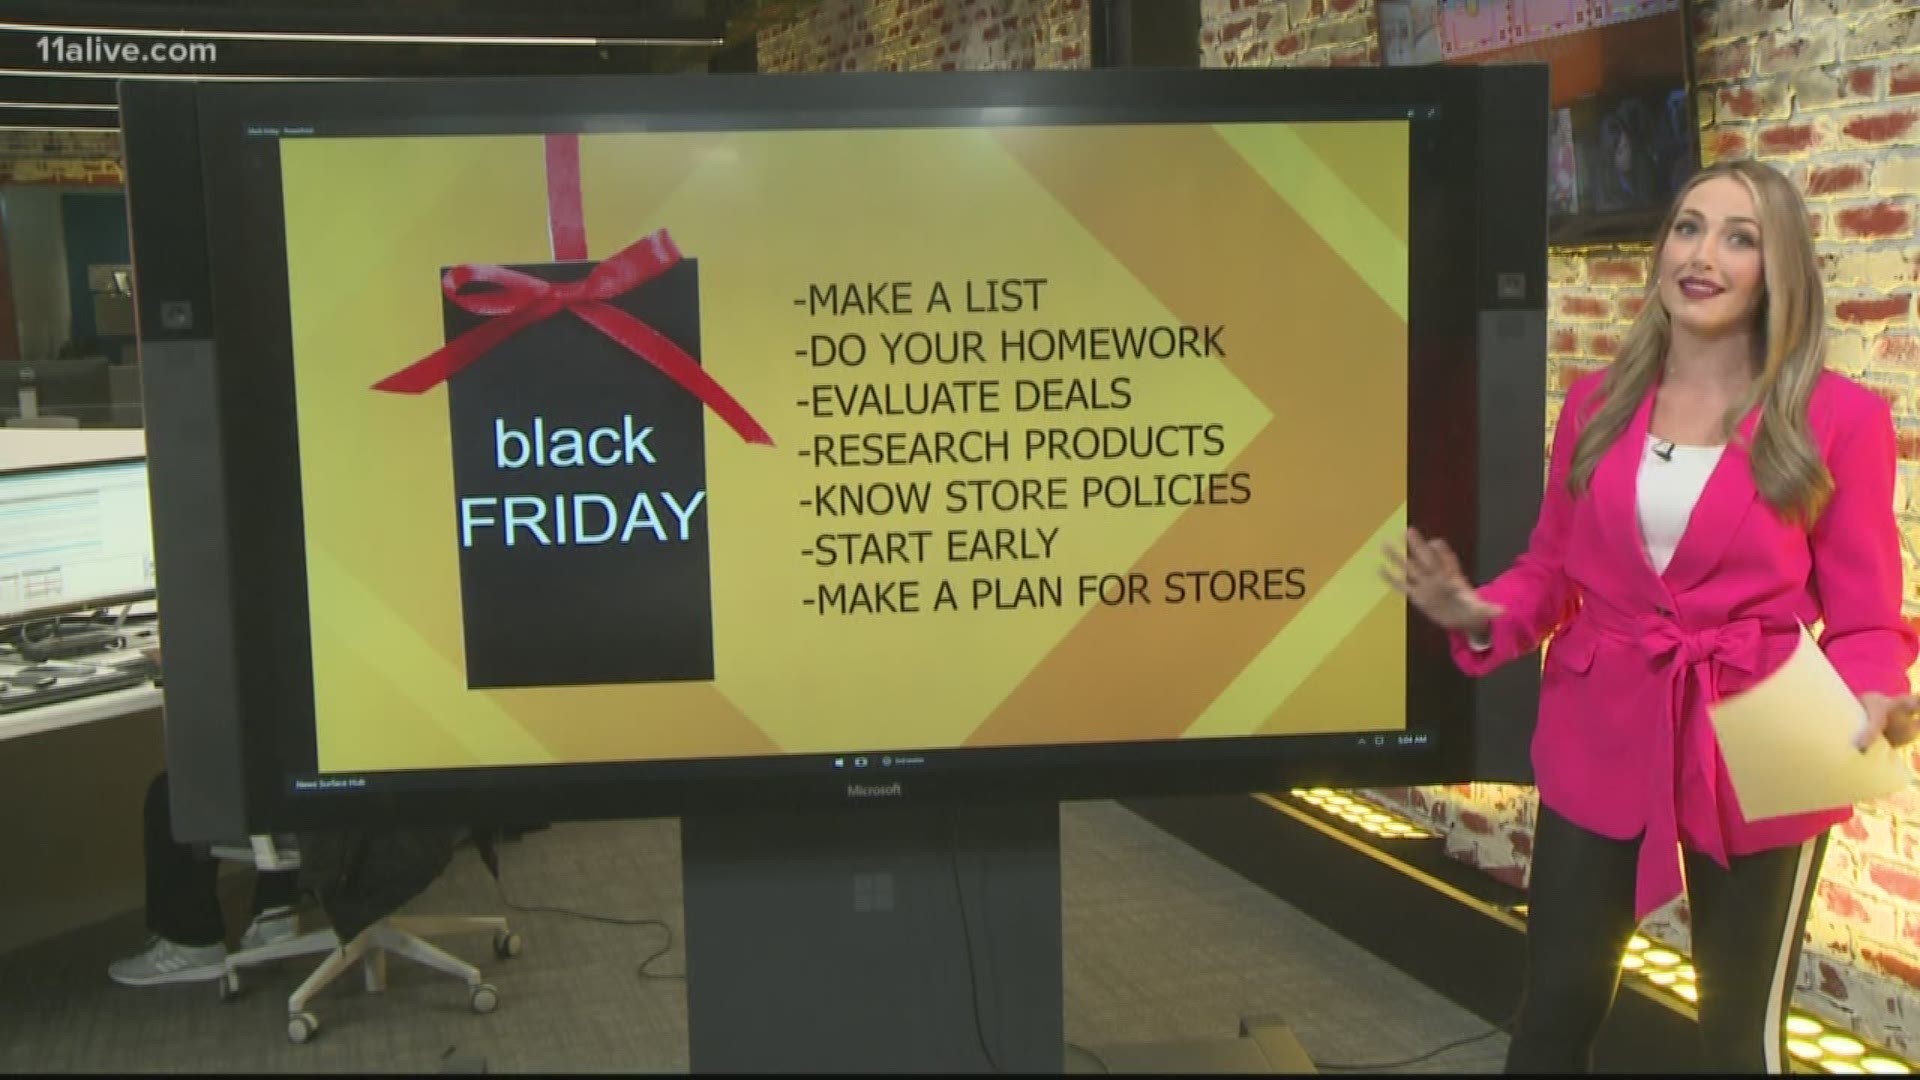 Heading out this morning? Here's some helpful info if you're out bargain hunting on Black Friday.